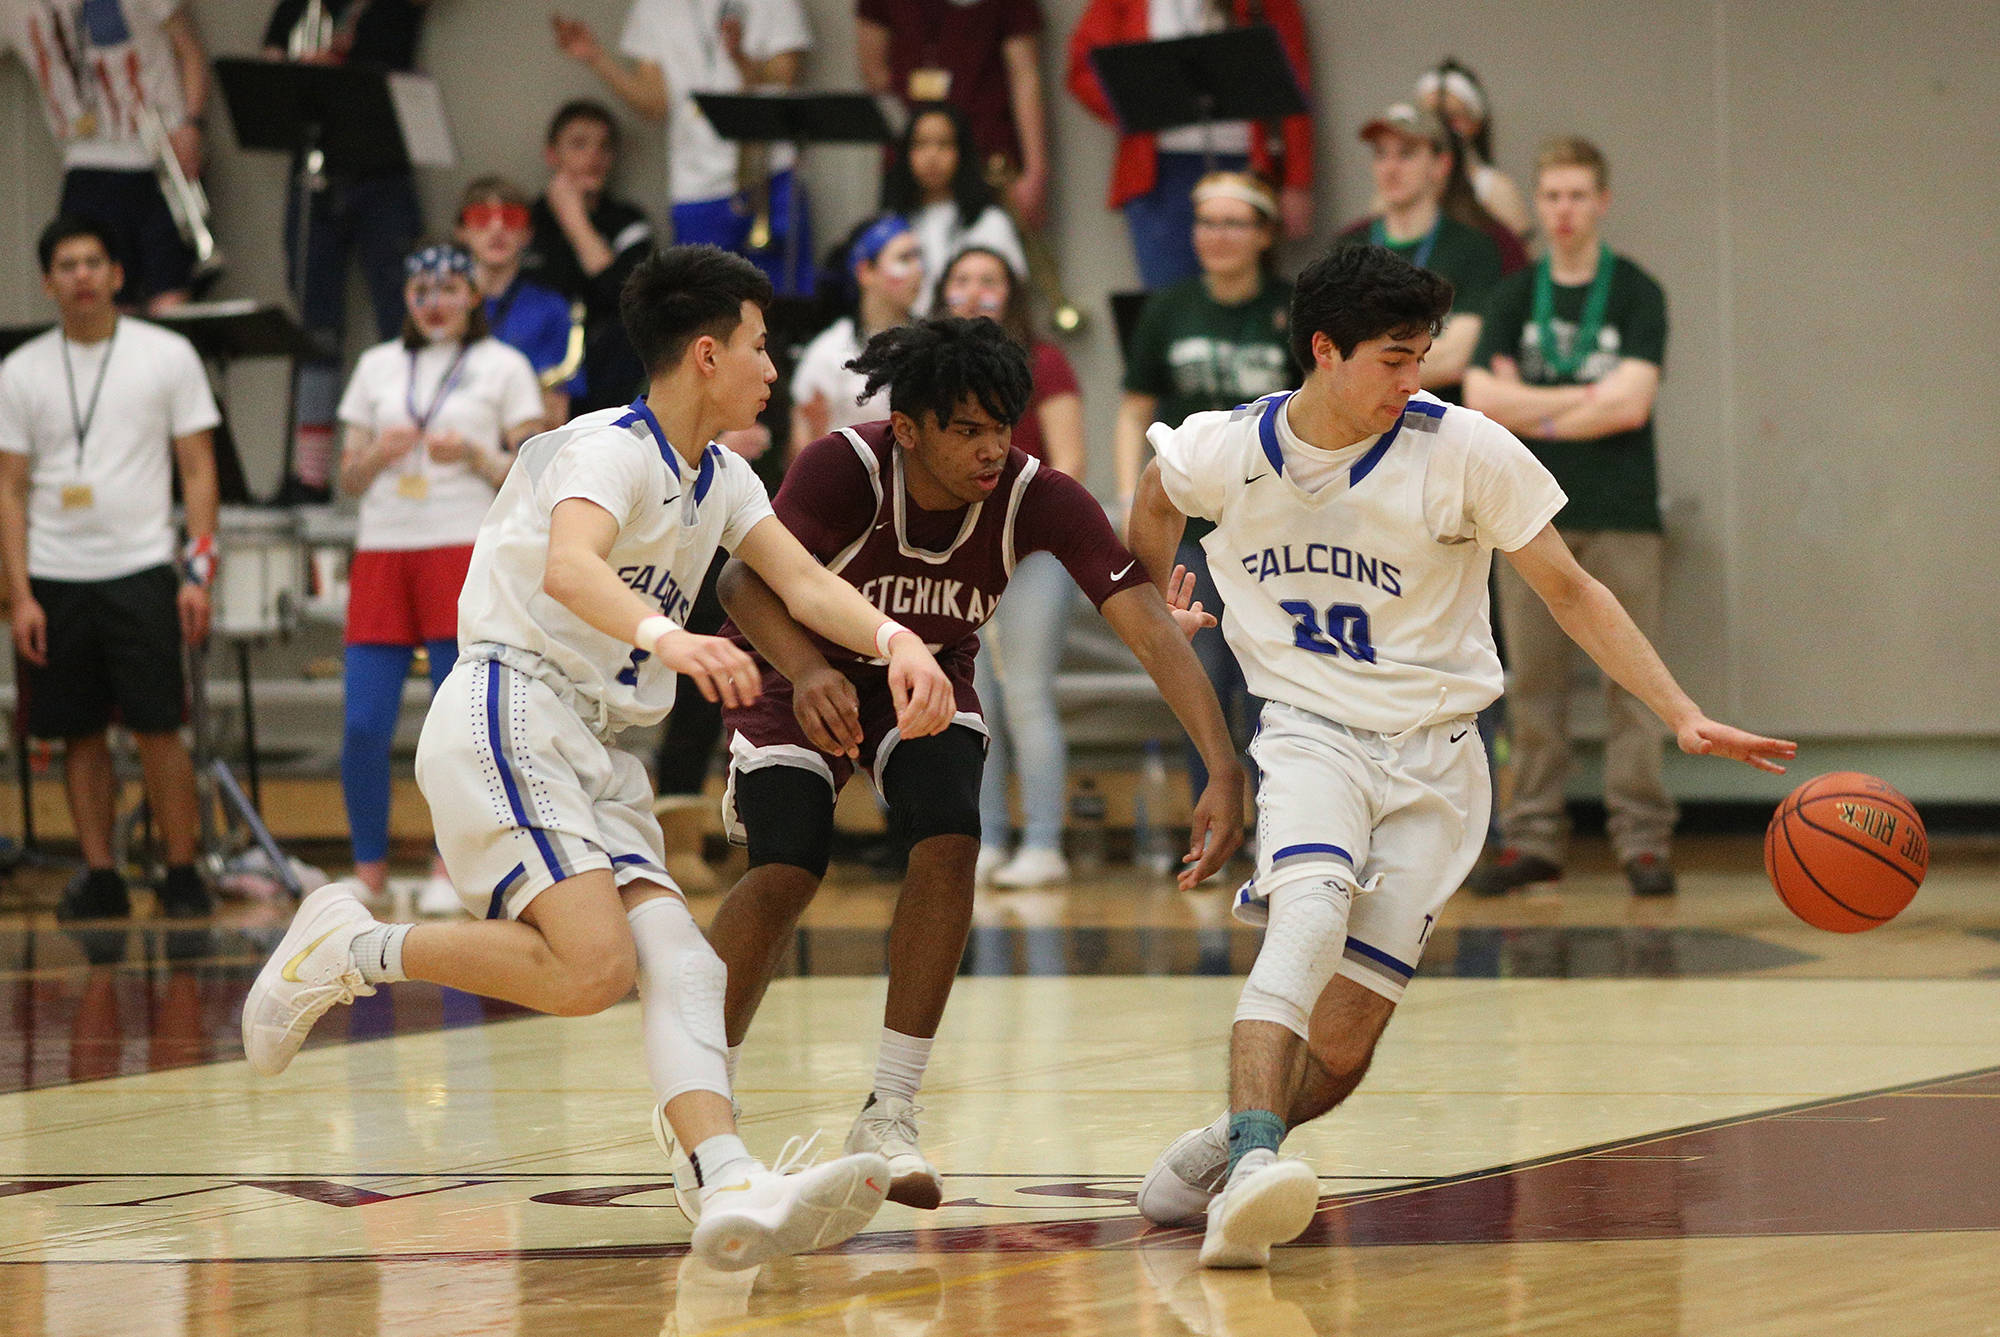 Thunder Mountain’s Josh McAndrews dribbles past Kayhi’s Chris Lee Wednesday night in the Region V 4A tournament. The Kings defeated the Falcons 49-47 to advance to the boys championship game on Friday. Thunder Mountain plays JDHS today at 1:15 p.m. today in the loser’s bracket. (Dustin Safranek | Ketchikan Daily News)